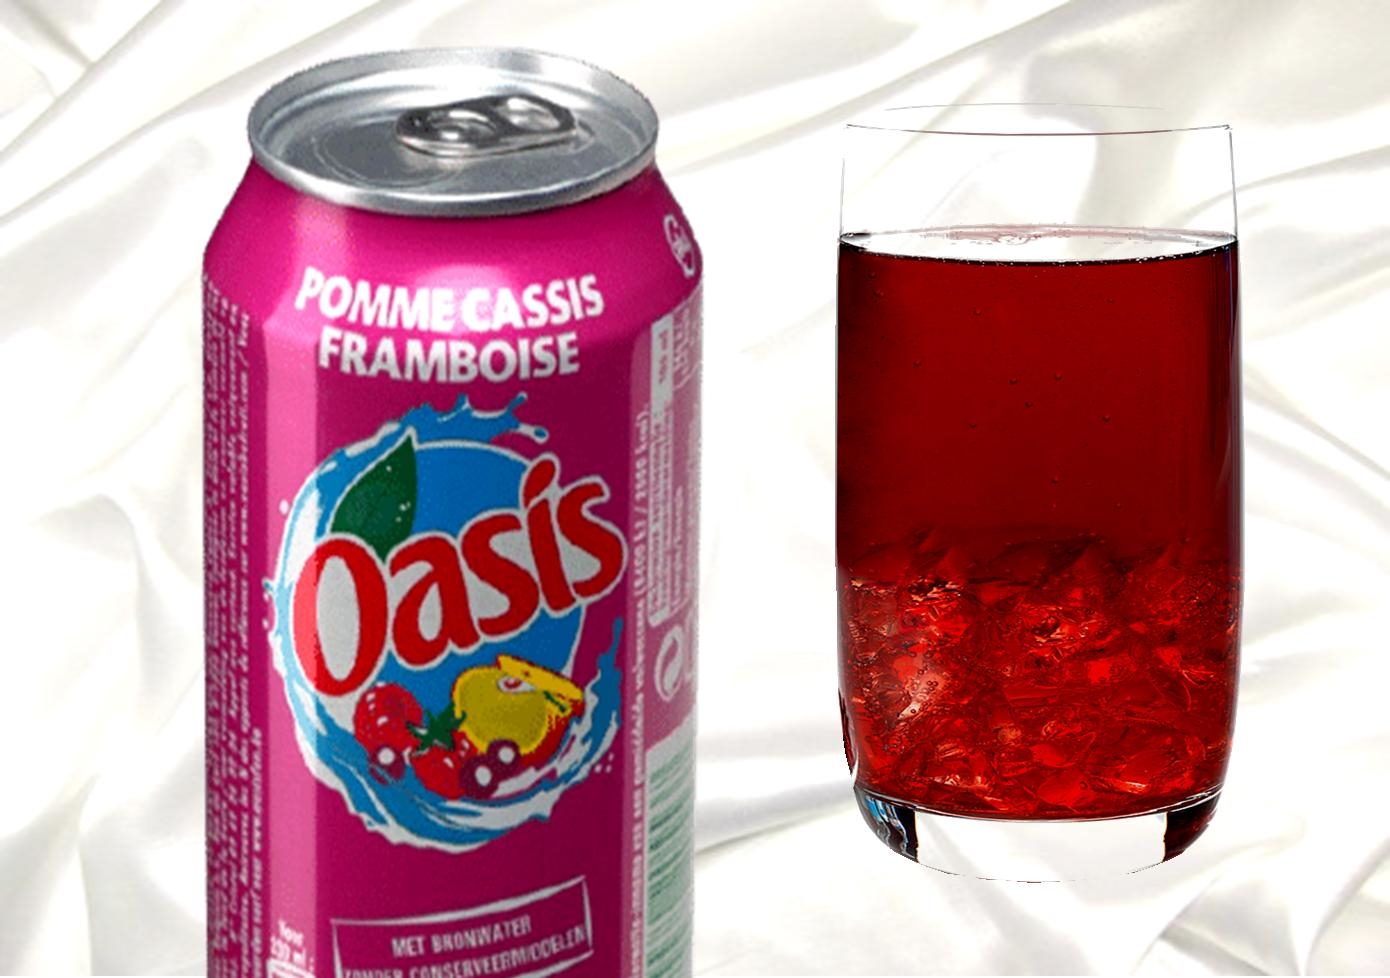 OASIS POMME CASSIS FRAMBOISE 33 CL